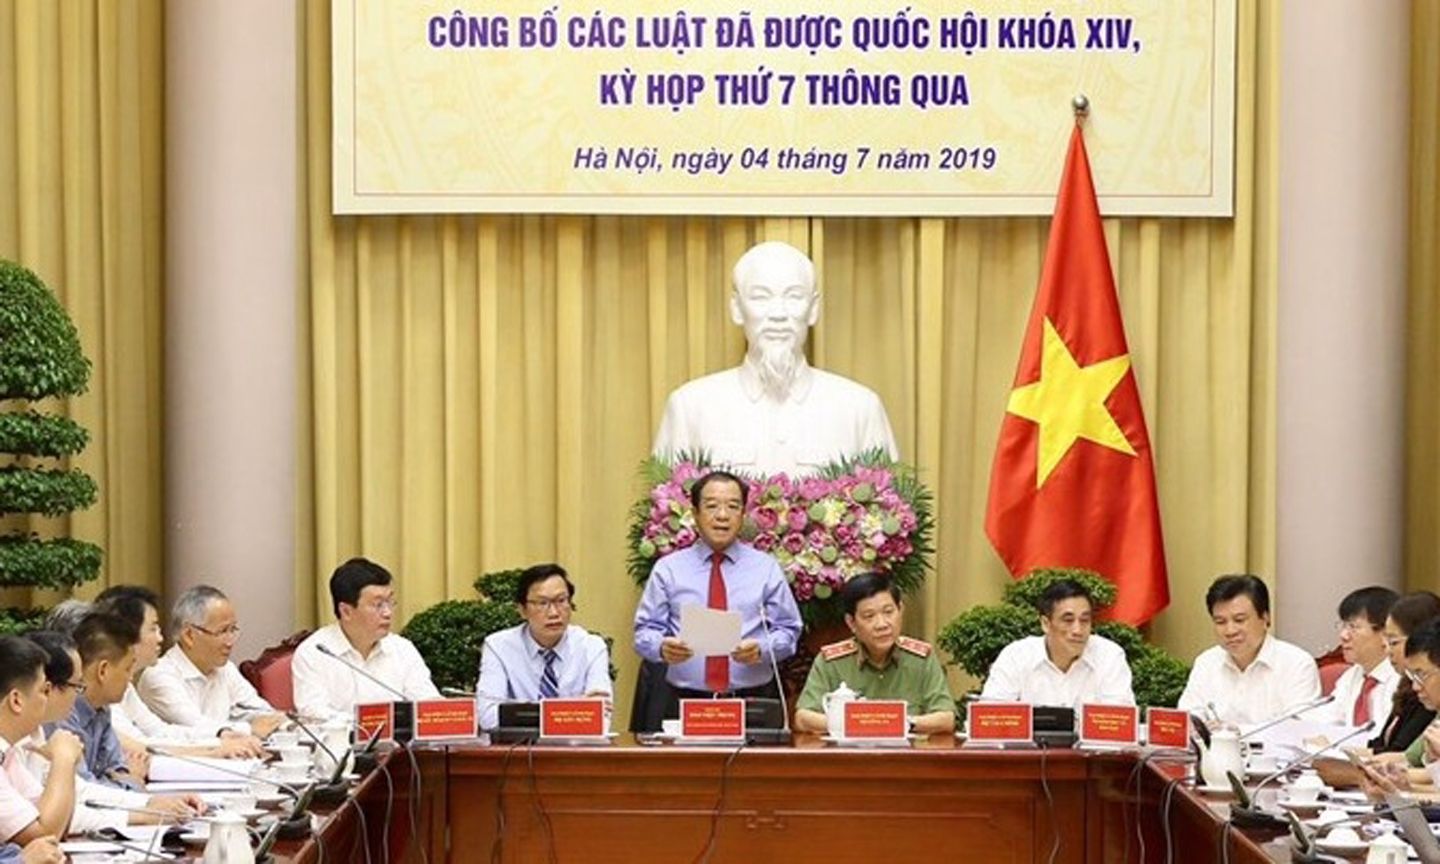 The press conference to announce the presidential order on seven laws. (Photo: VGP)